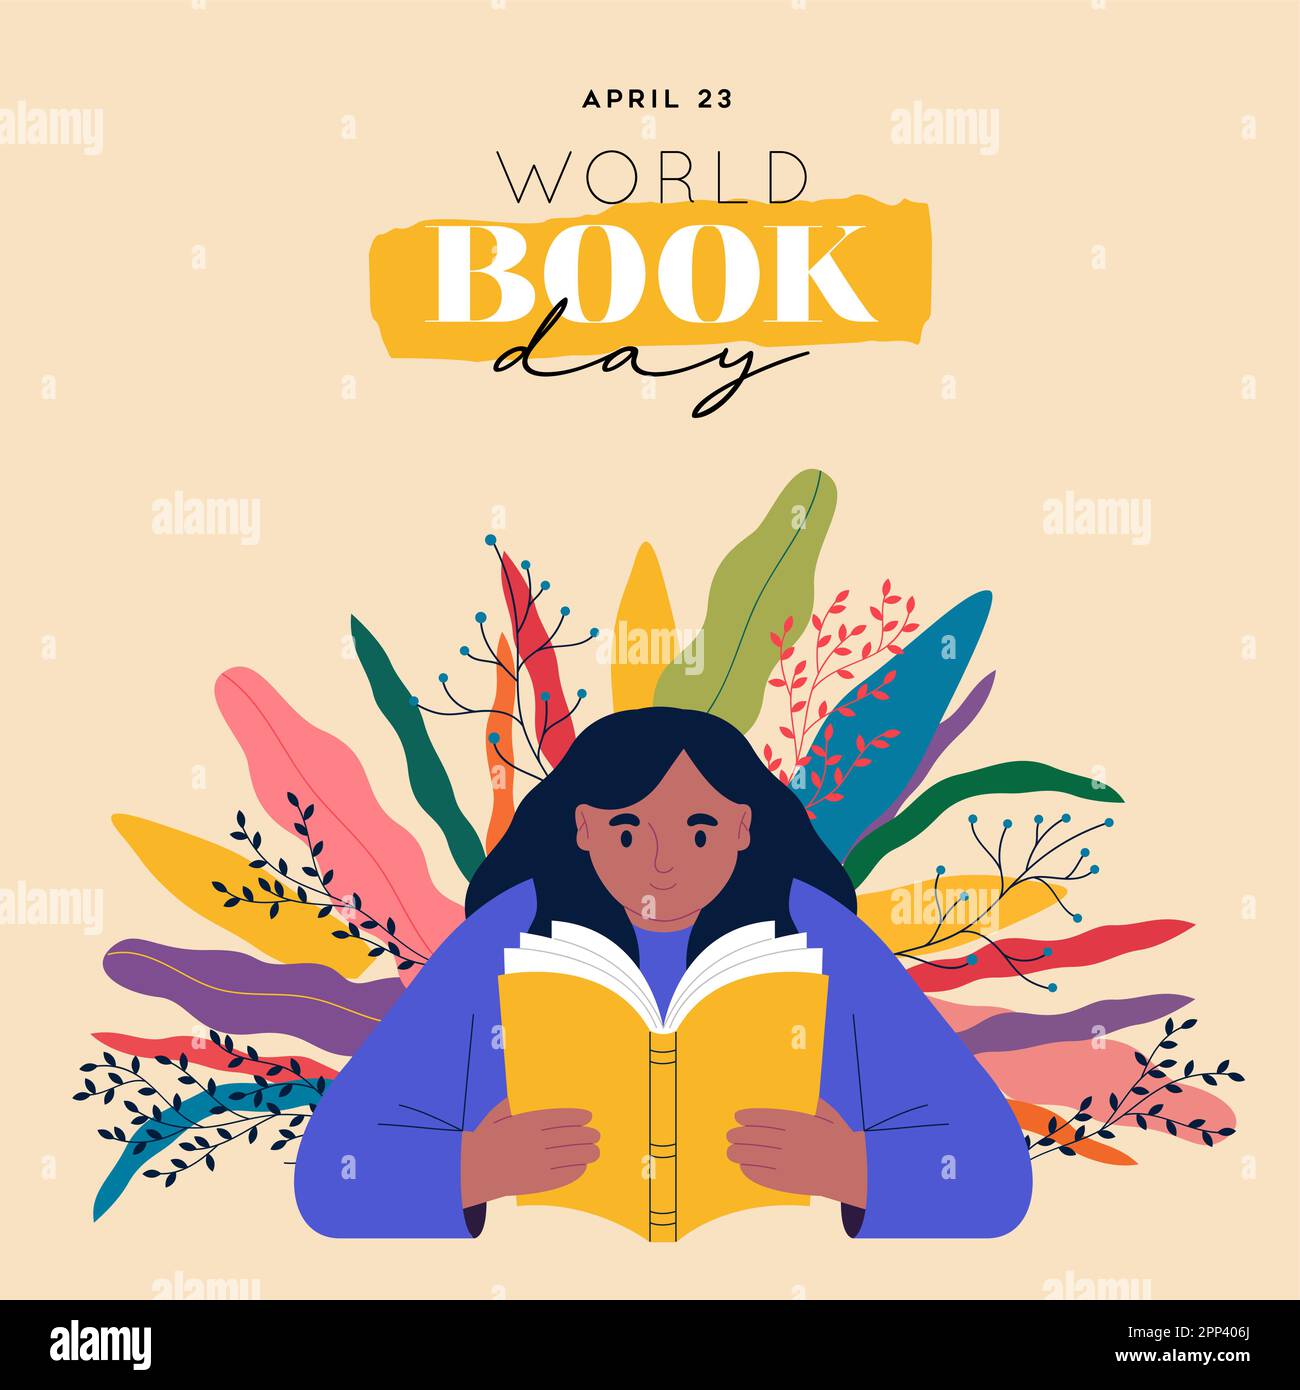 World book day greeting card illustration of young girl kid reading book with colorful plant leaf growing inside for education learning concept. April Stock Vector